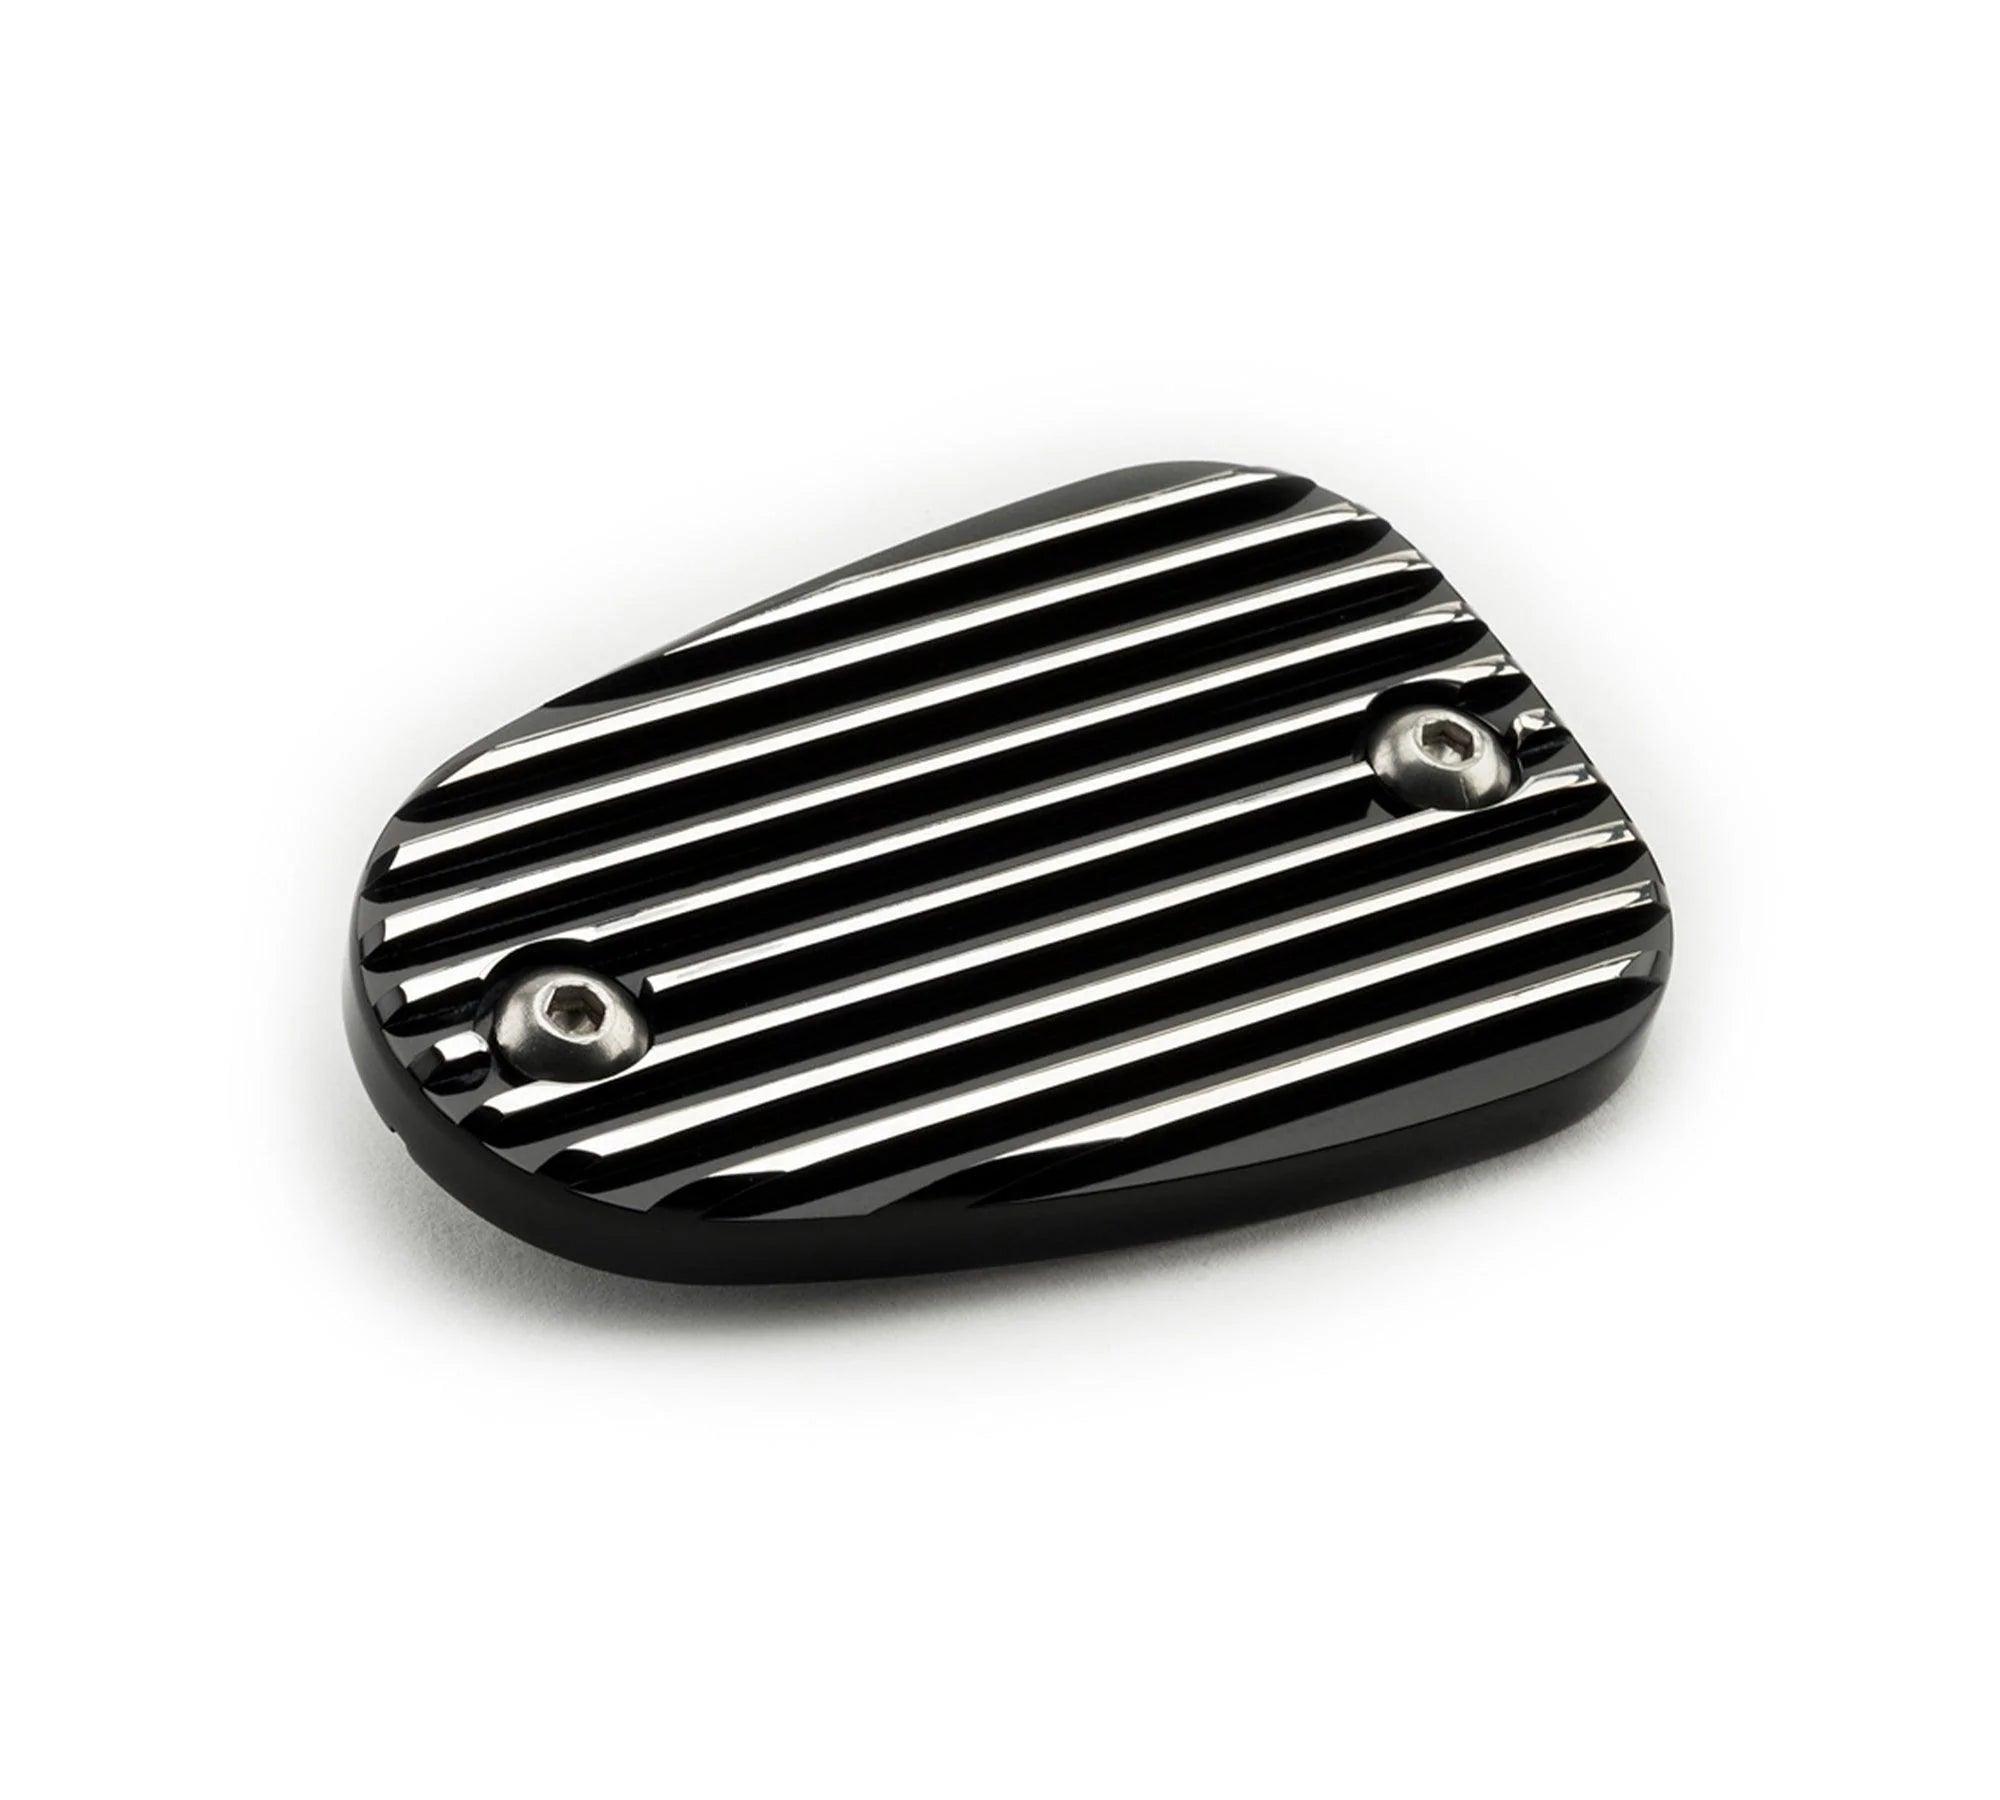 Finned Master Cylinder Cover for Triumph Motorcycles